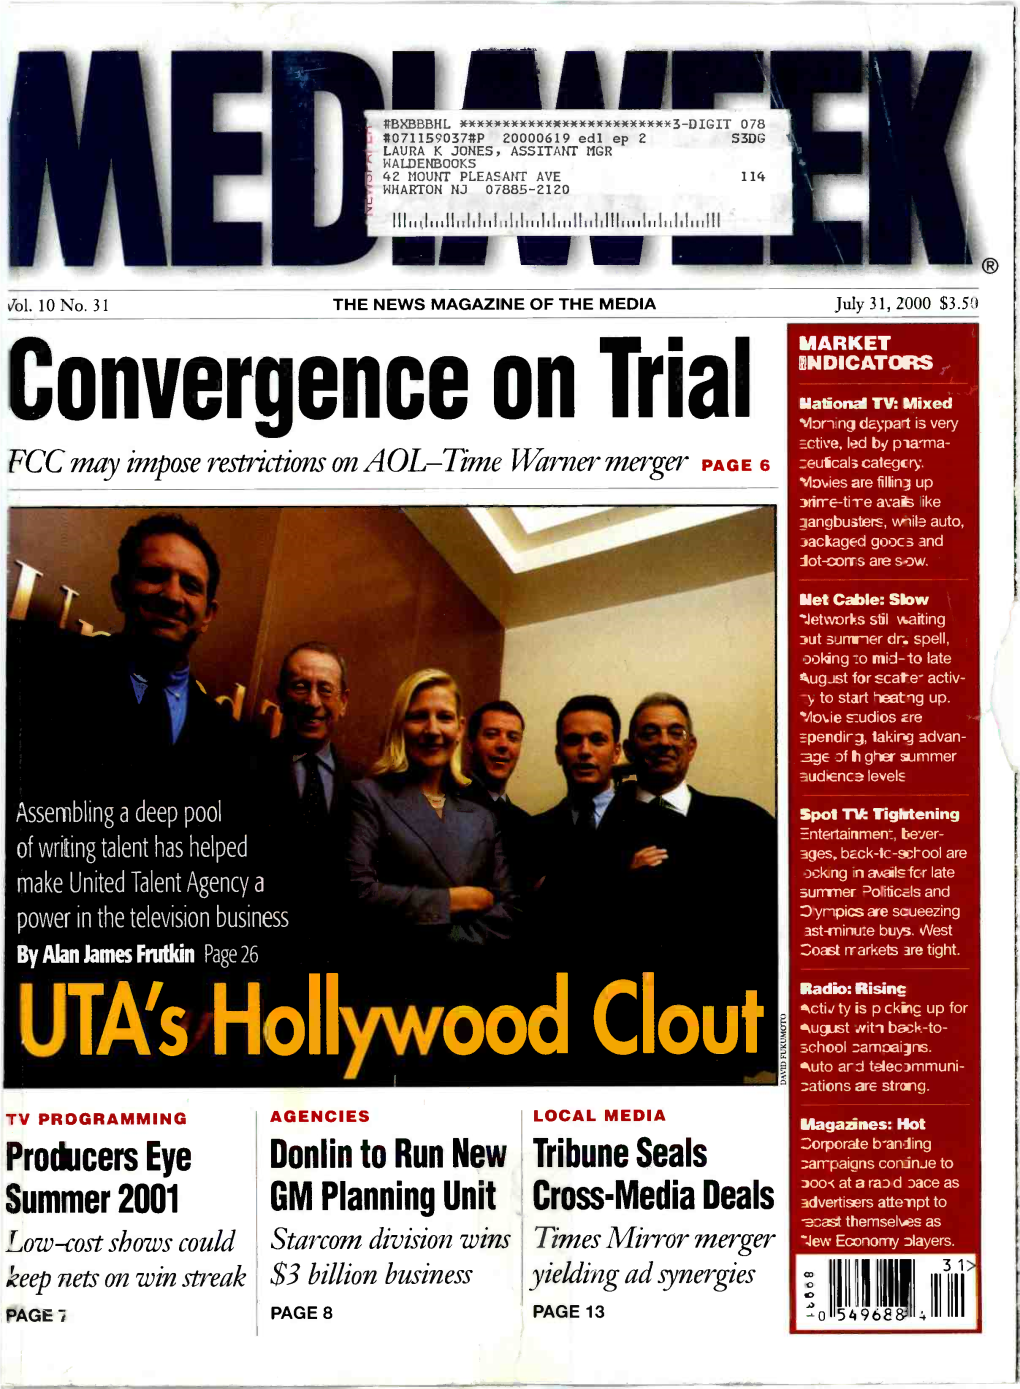 Convergence on Trial